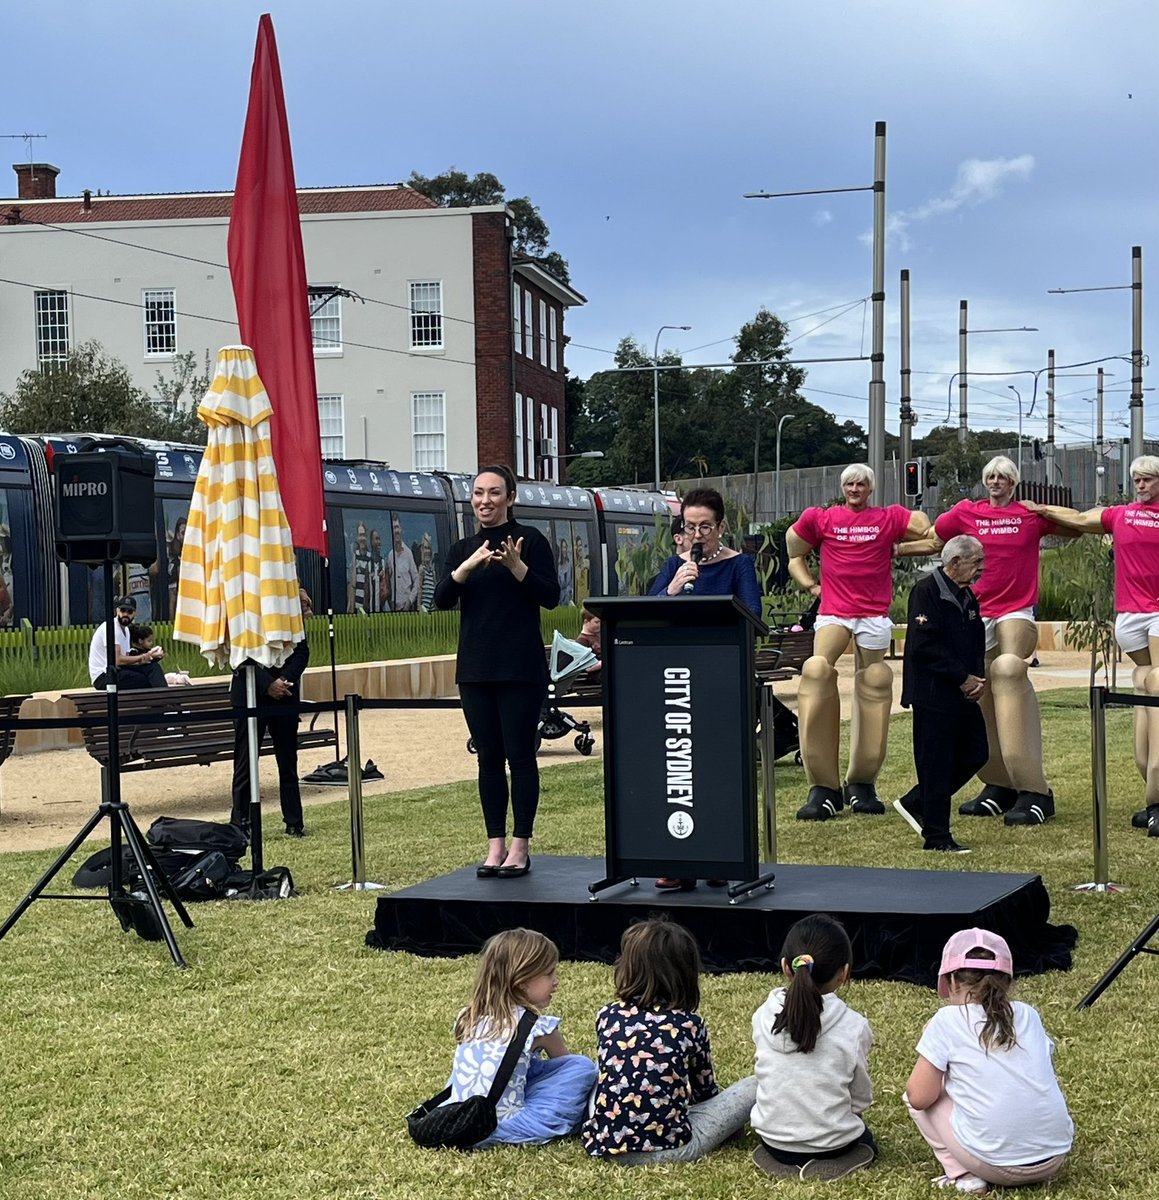 At the opening of #wimbopark in Surry Hills. 
Great crowd, great space, designed by #suebarnsley landscape architect for @cityofsydney.
Lord Mayor @CloverMoore doing the honours - Tram behind her just needs a stop here!
#publicsydney